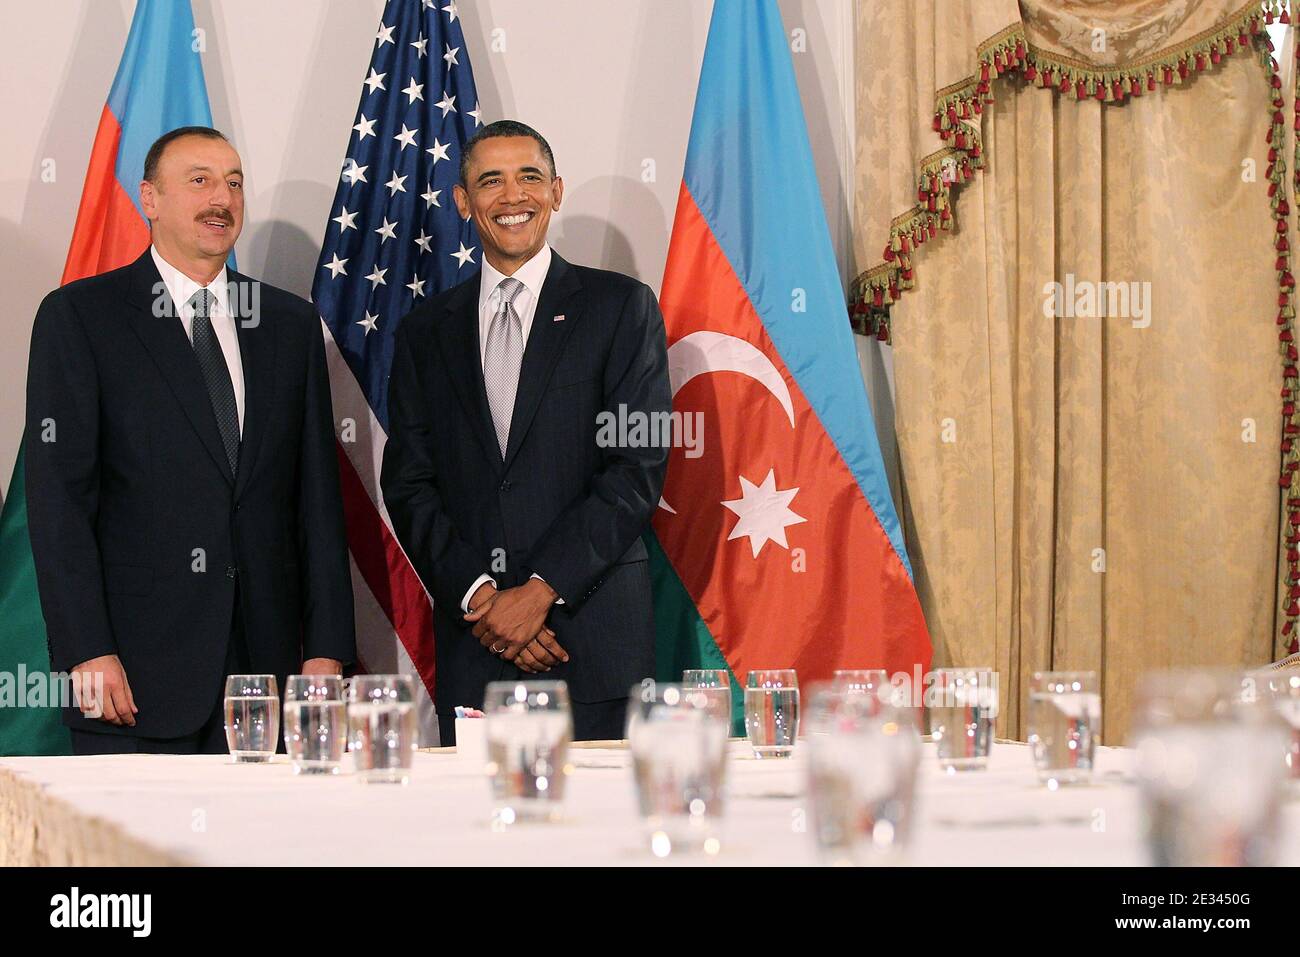 U.S. President Barack Obama (R) shakes hands with President Ilham Aliyev of Azerbaijan at a bilateral meeting in New York City, NY, USA on September 24, 2010. Obama has been in New York since Wednesday attending the annual General Assembly at the United Nations, where yesterday he stressed the need for a resolution between Israel and Palestine, and a renewed international effort to keep Iran from attaining nuclear weapons. Photo by Spencer Platt/ABACAPRESS.COM (Pictured: Barack Obama, Ilham Aliyev) Stock Photo